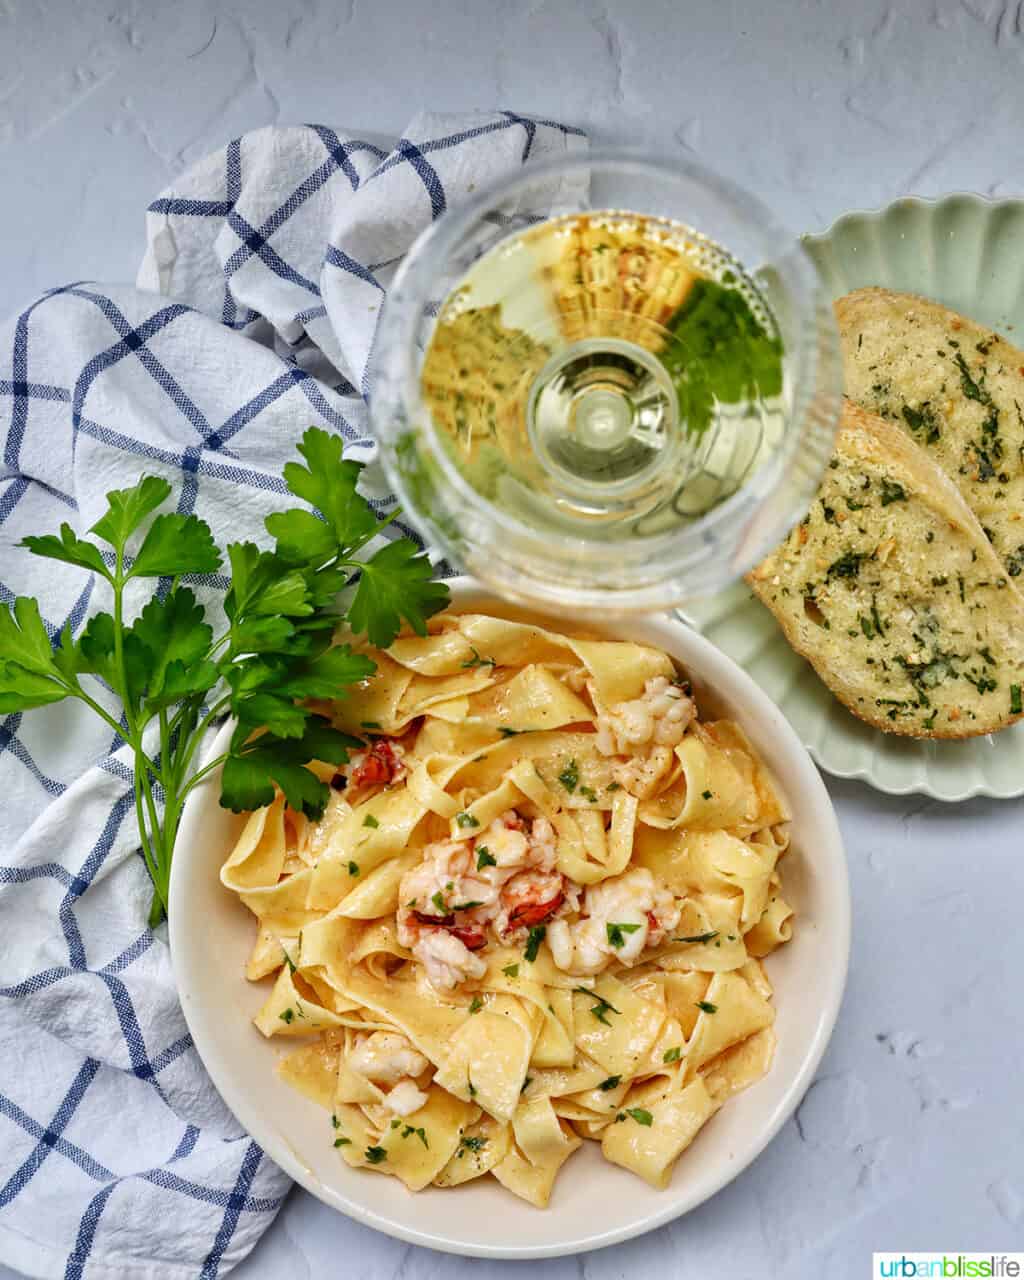 bowl of lobster pasta with side of parsley with glass of white wine and side of garlic bread.